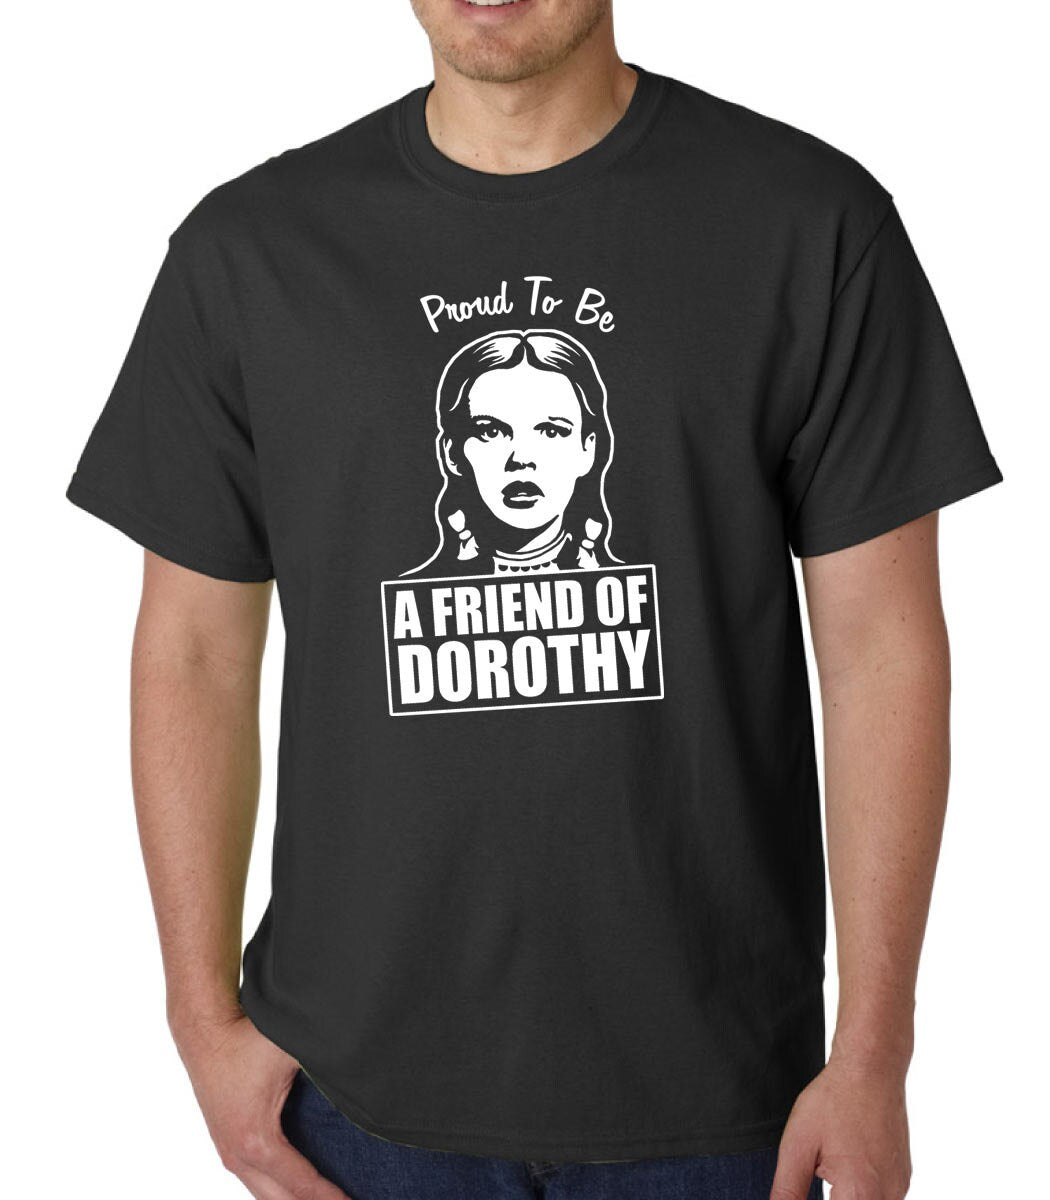 Proud To Be A Friend of Dorothy t-shirt